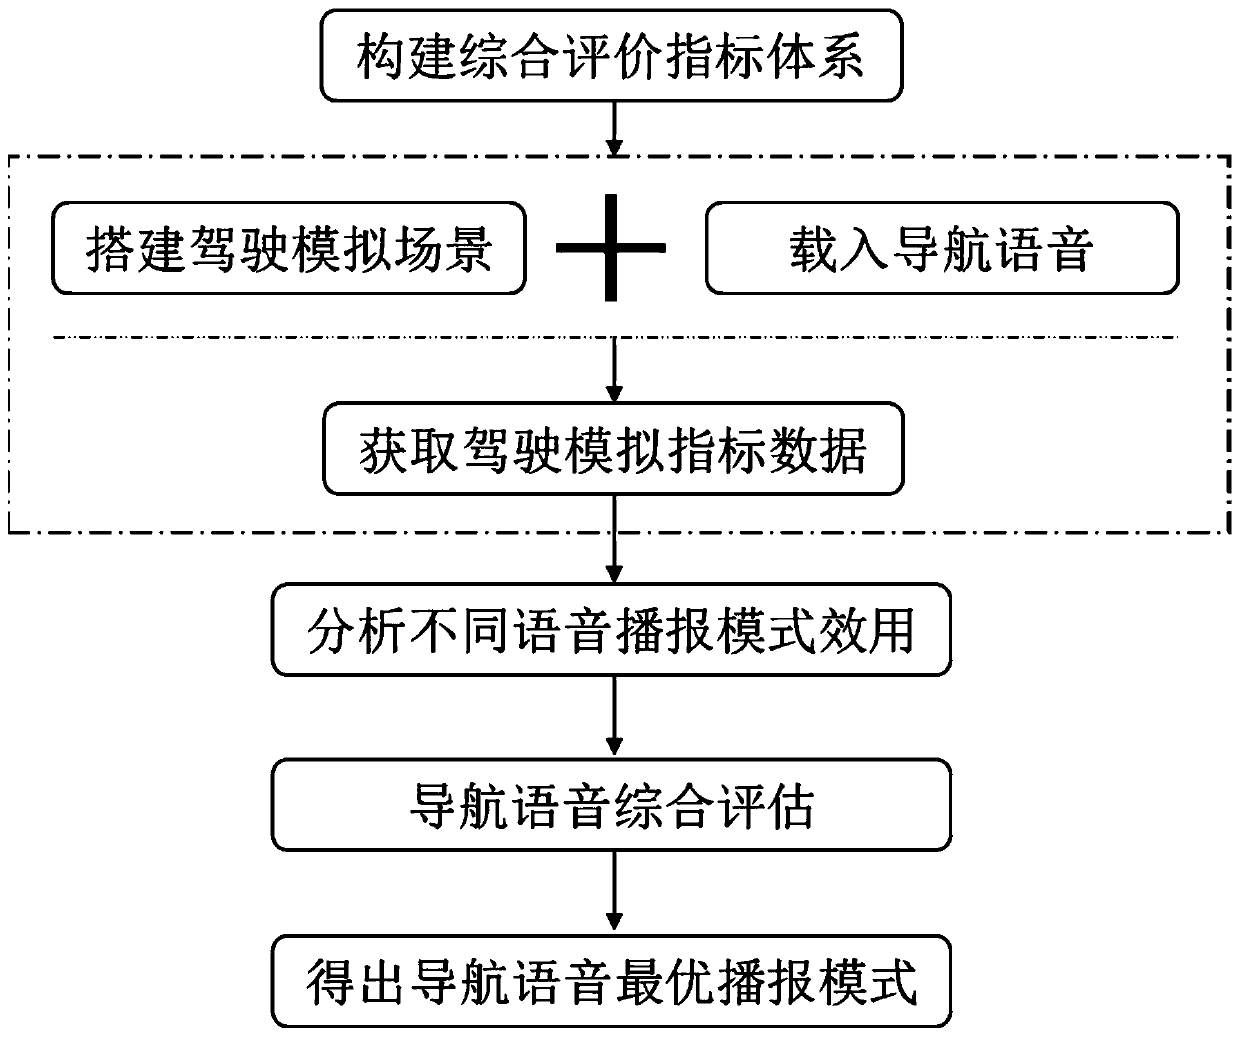 Navigation broadcast mode utility evaluation method and system based on driving simulation technology